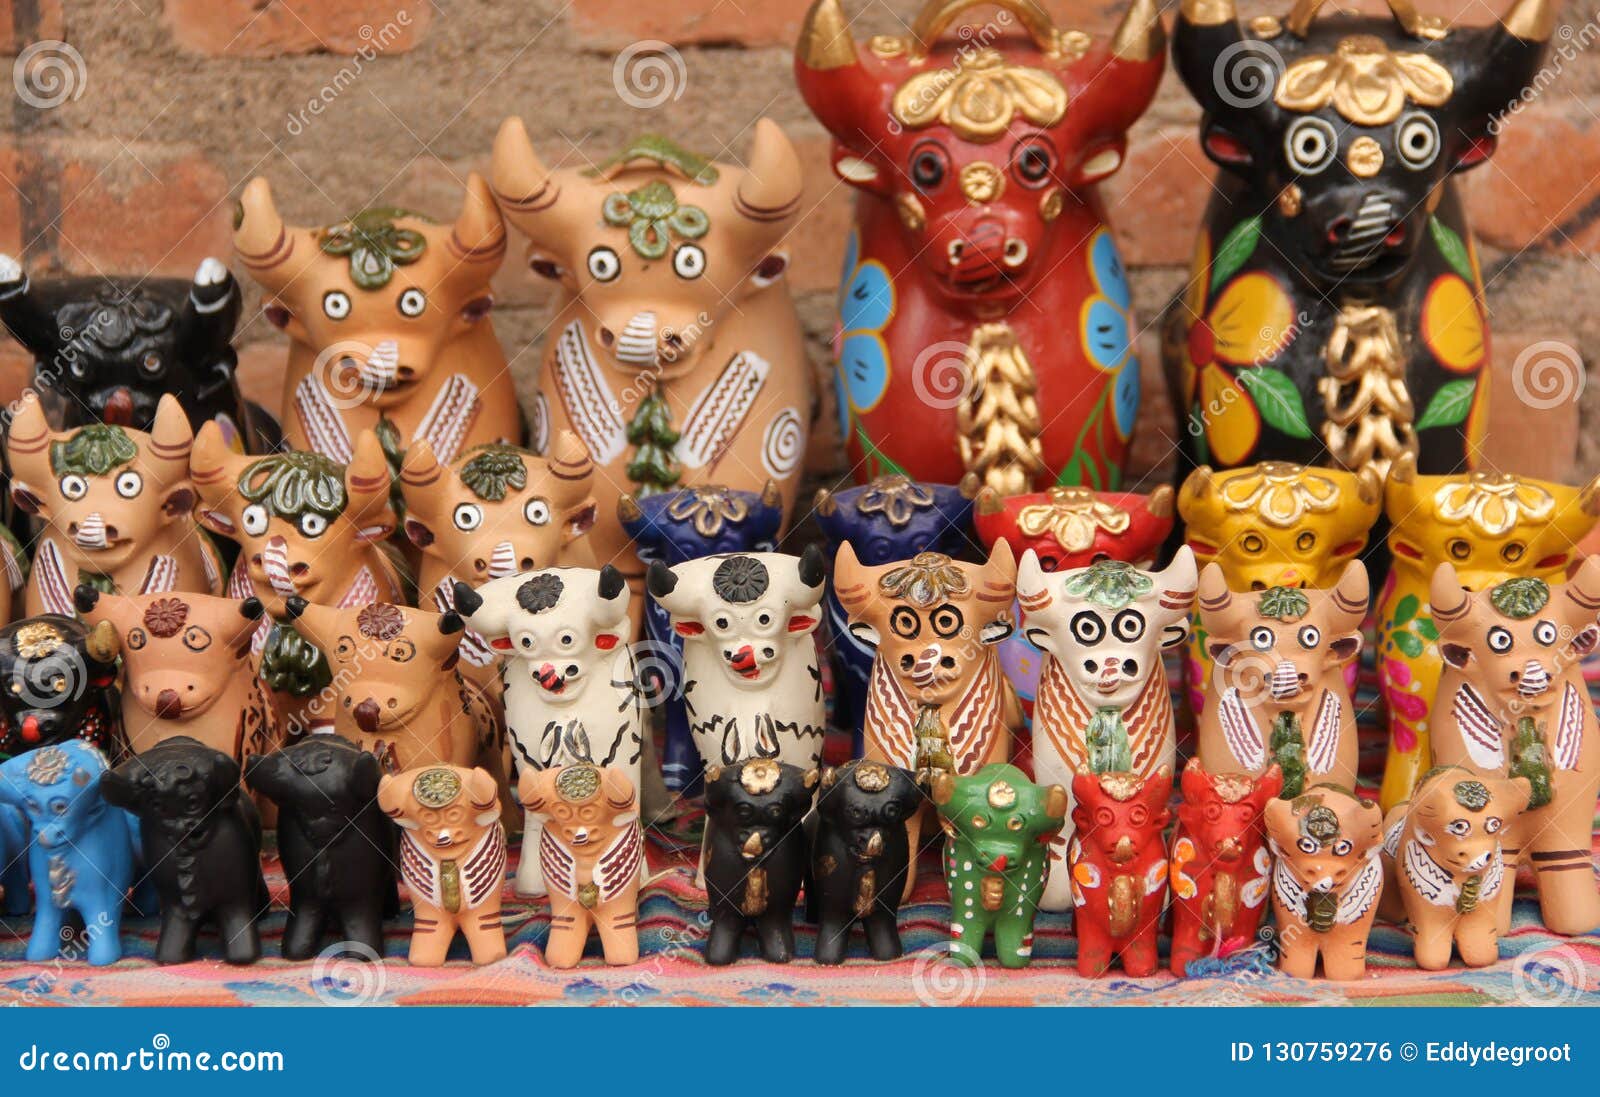 a collection of pucara bull statues